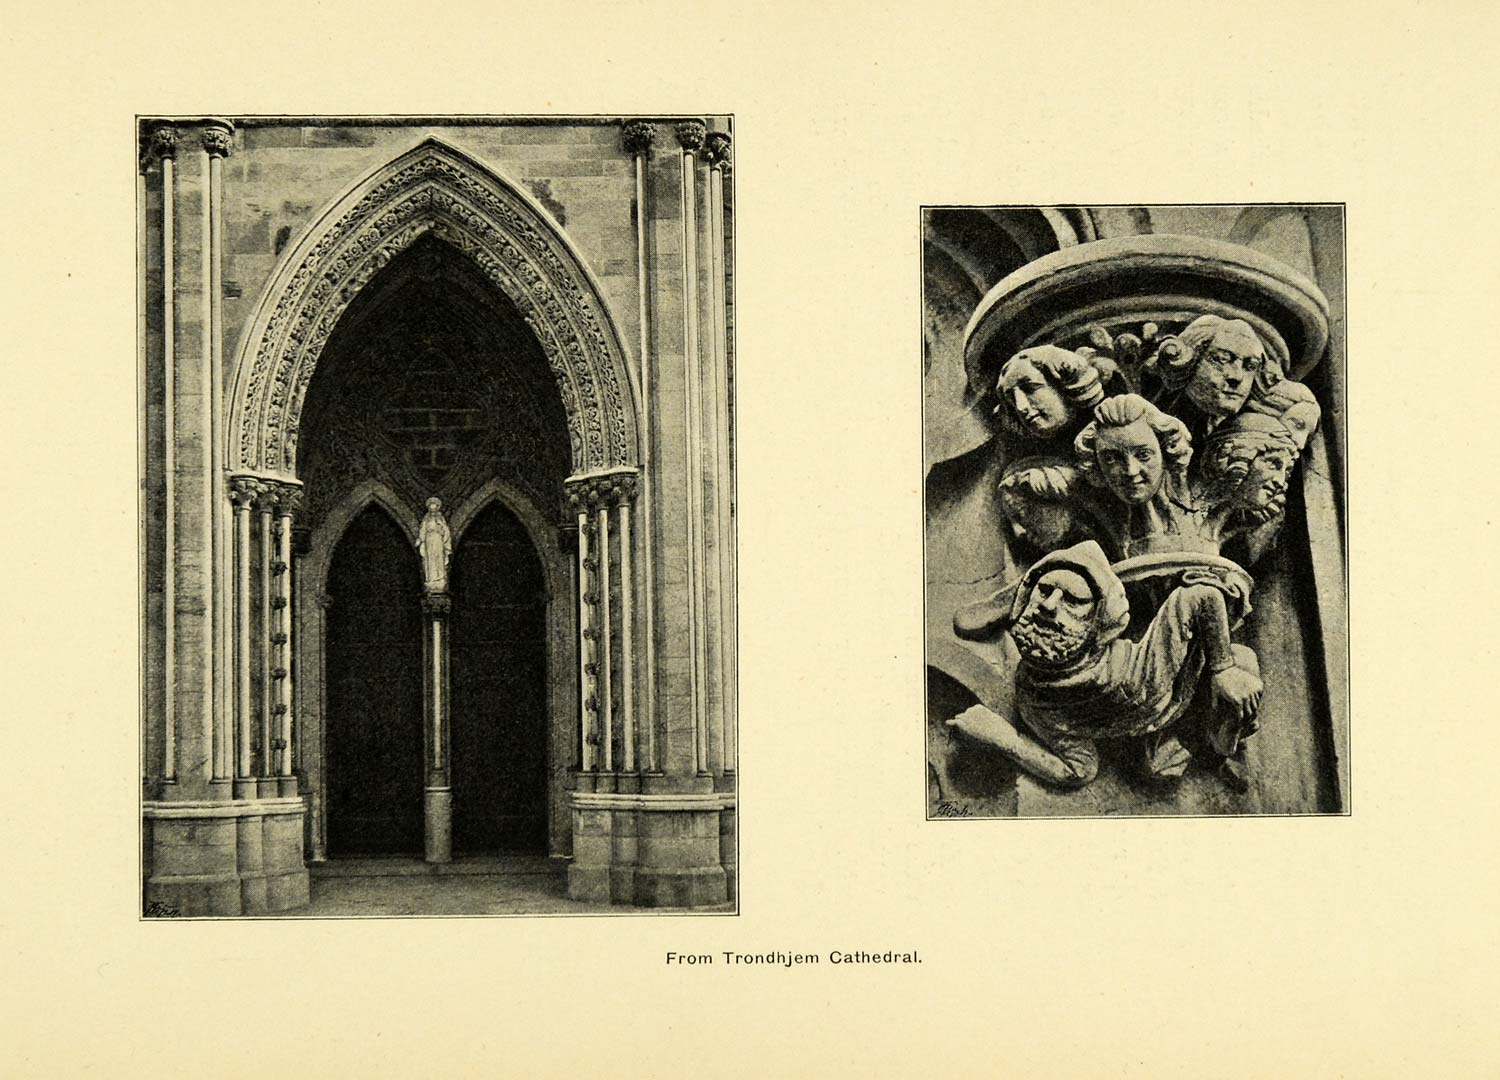 1900 Print Trondhjem Cathedral Norway Doorway Architecture Religious XGD1